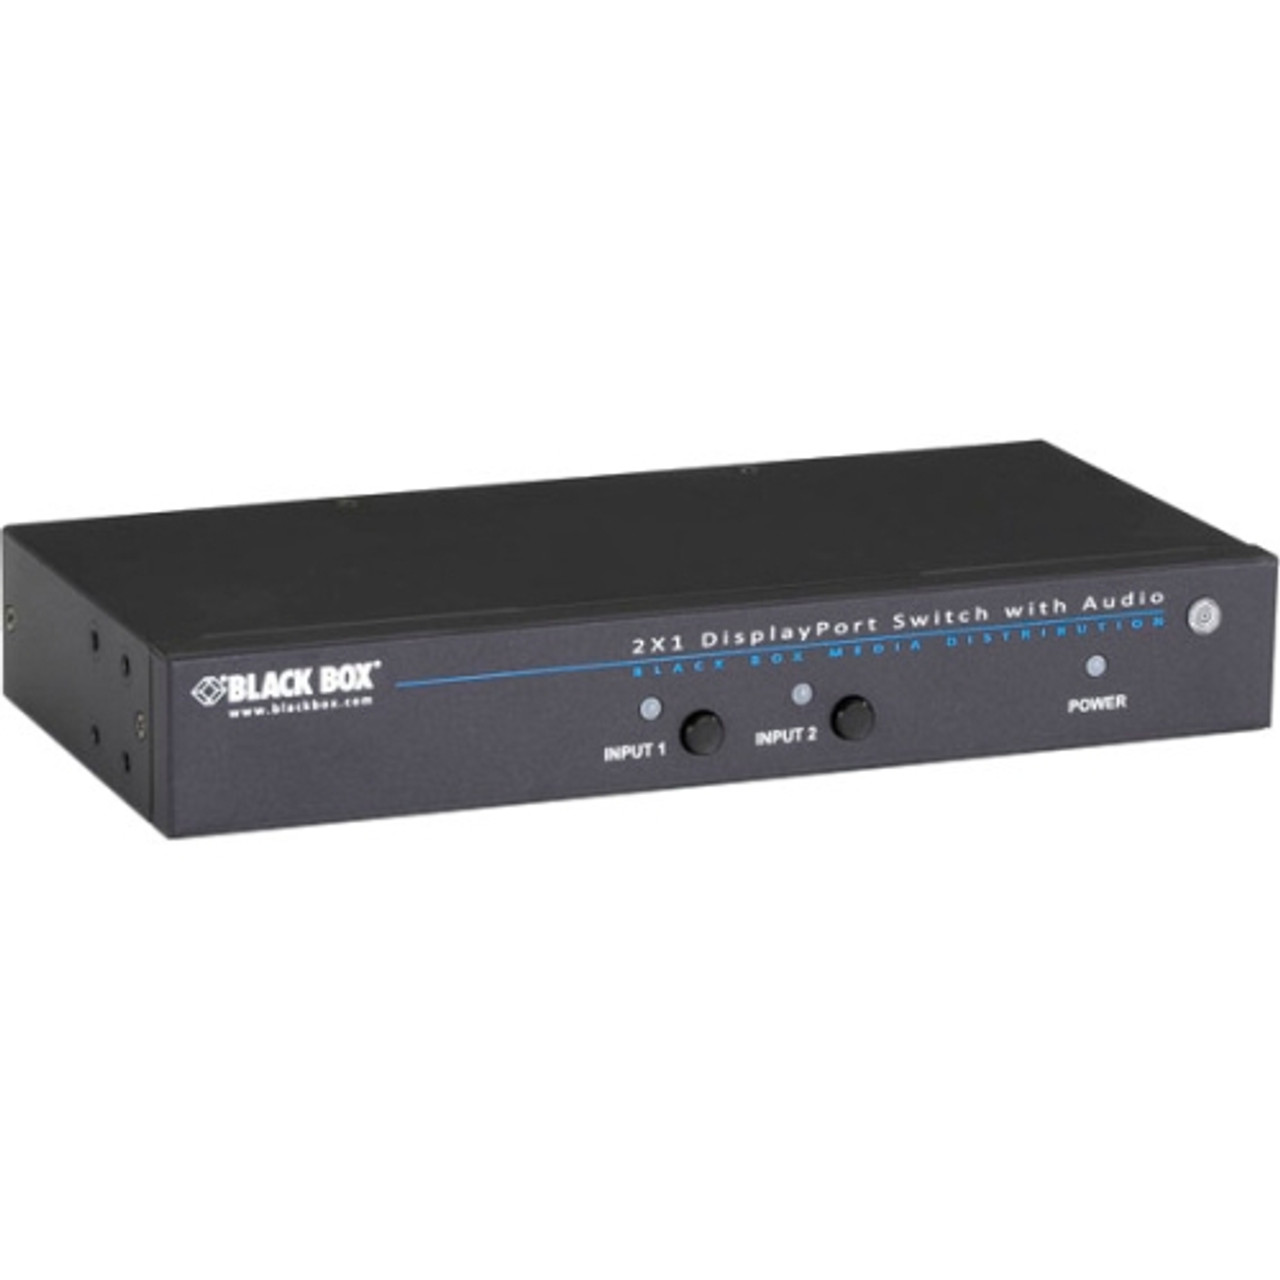 AVSW-DP2X1A Black Box 2 x 1 DisplayPort Switch with Serial and 3.5-mm Audio (Refurbished)